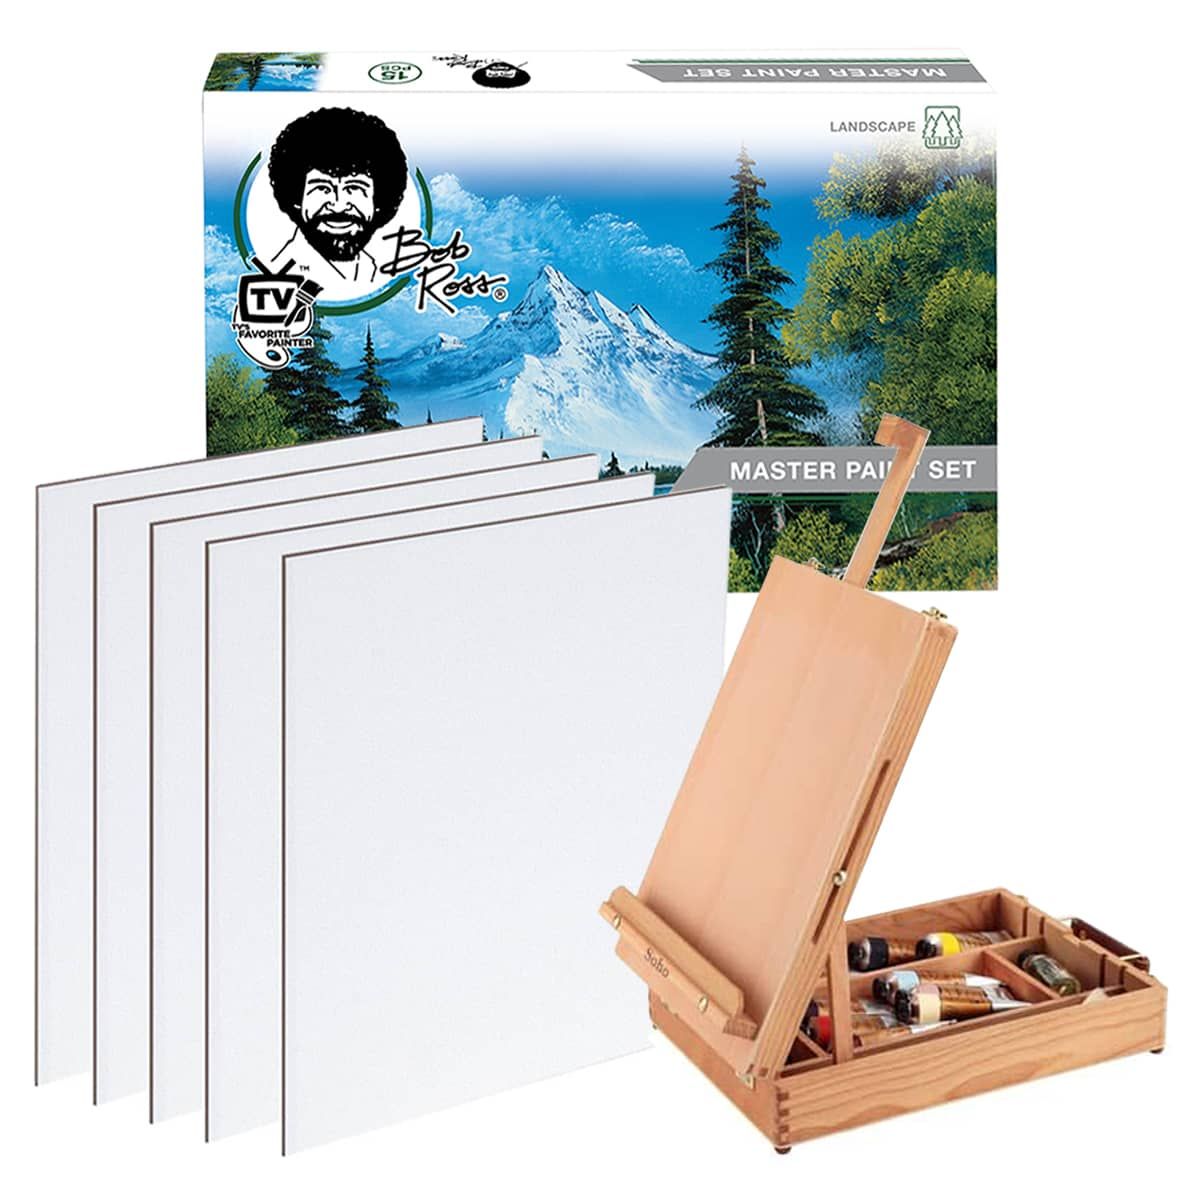  BOB ROSS 750006510 Paint, 16 Count (Pack of 1) : Arts, Crafts &  Sewing